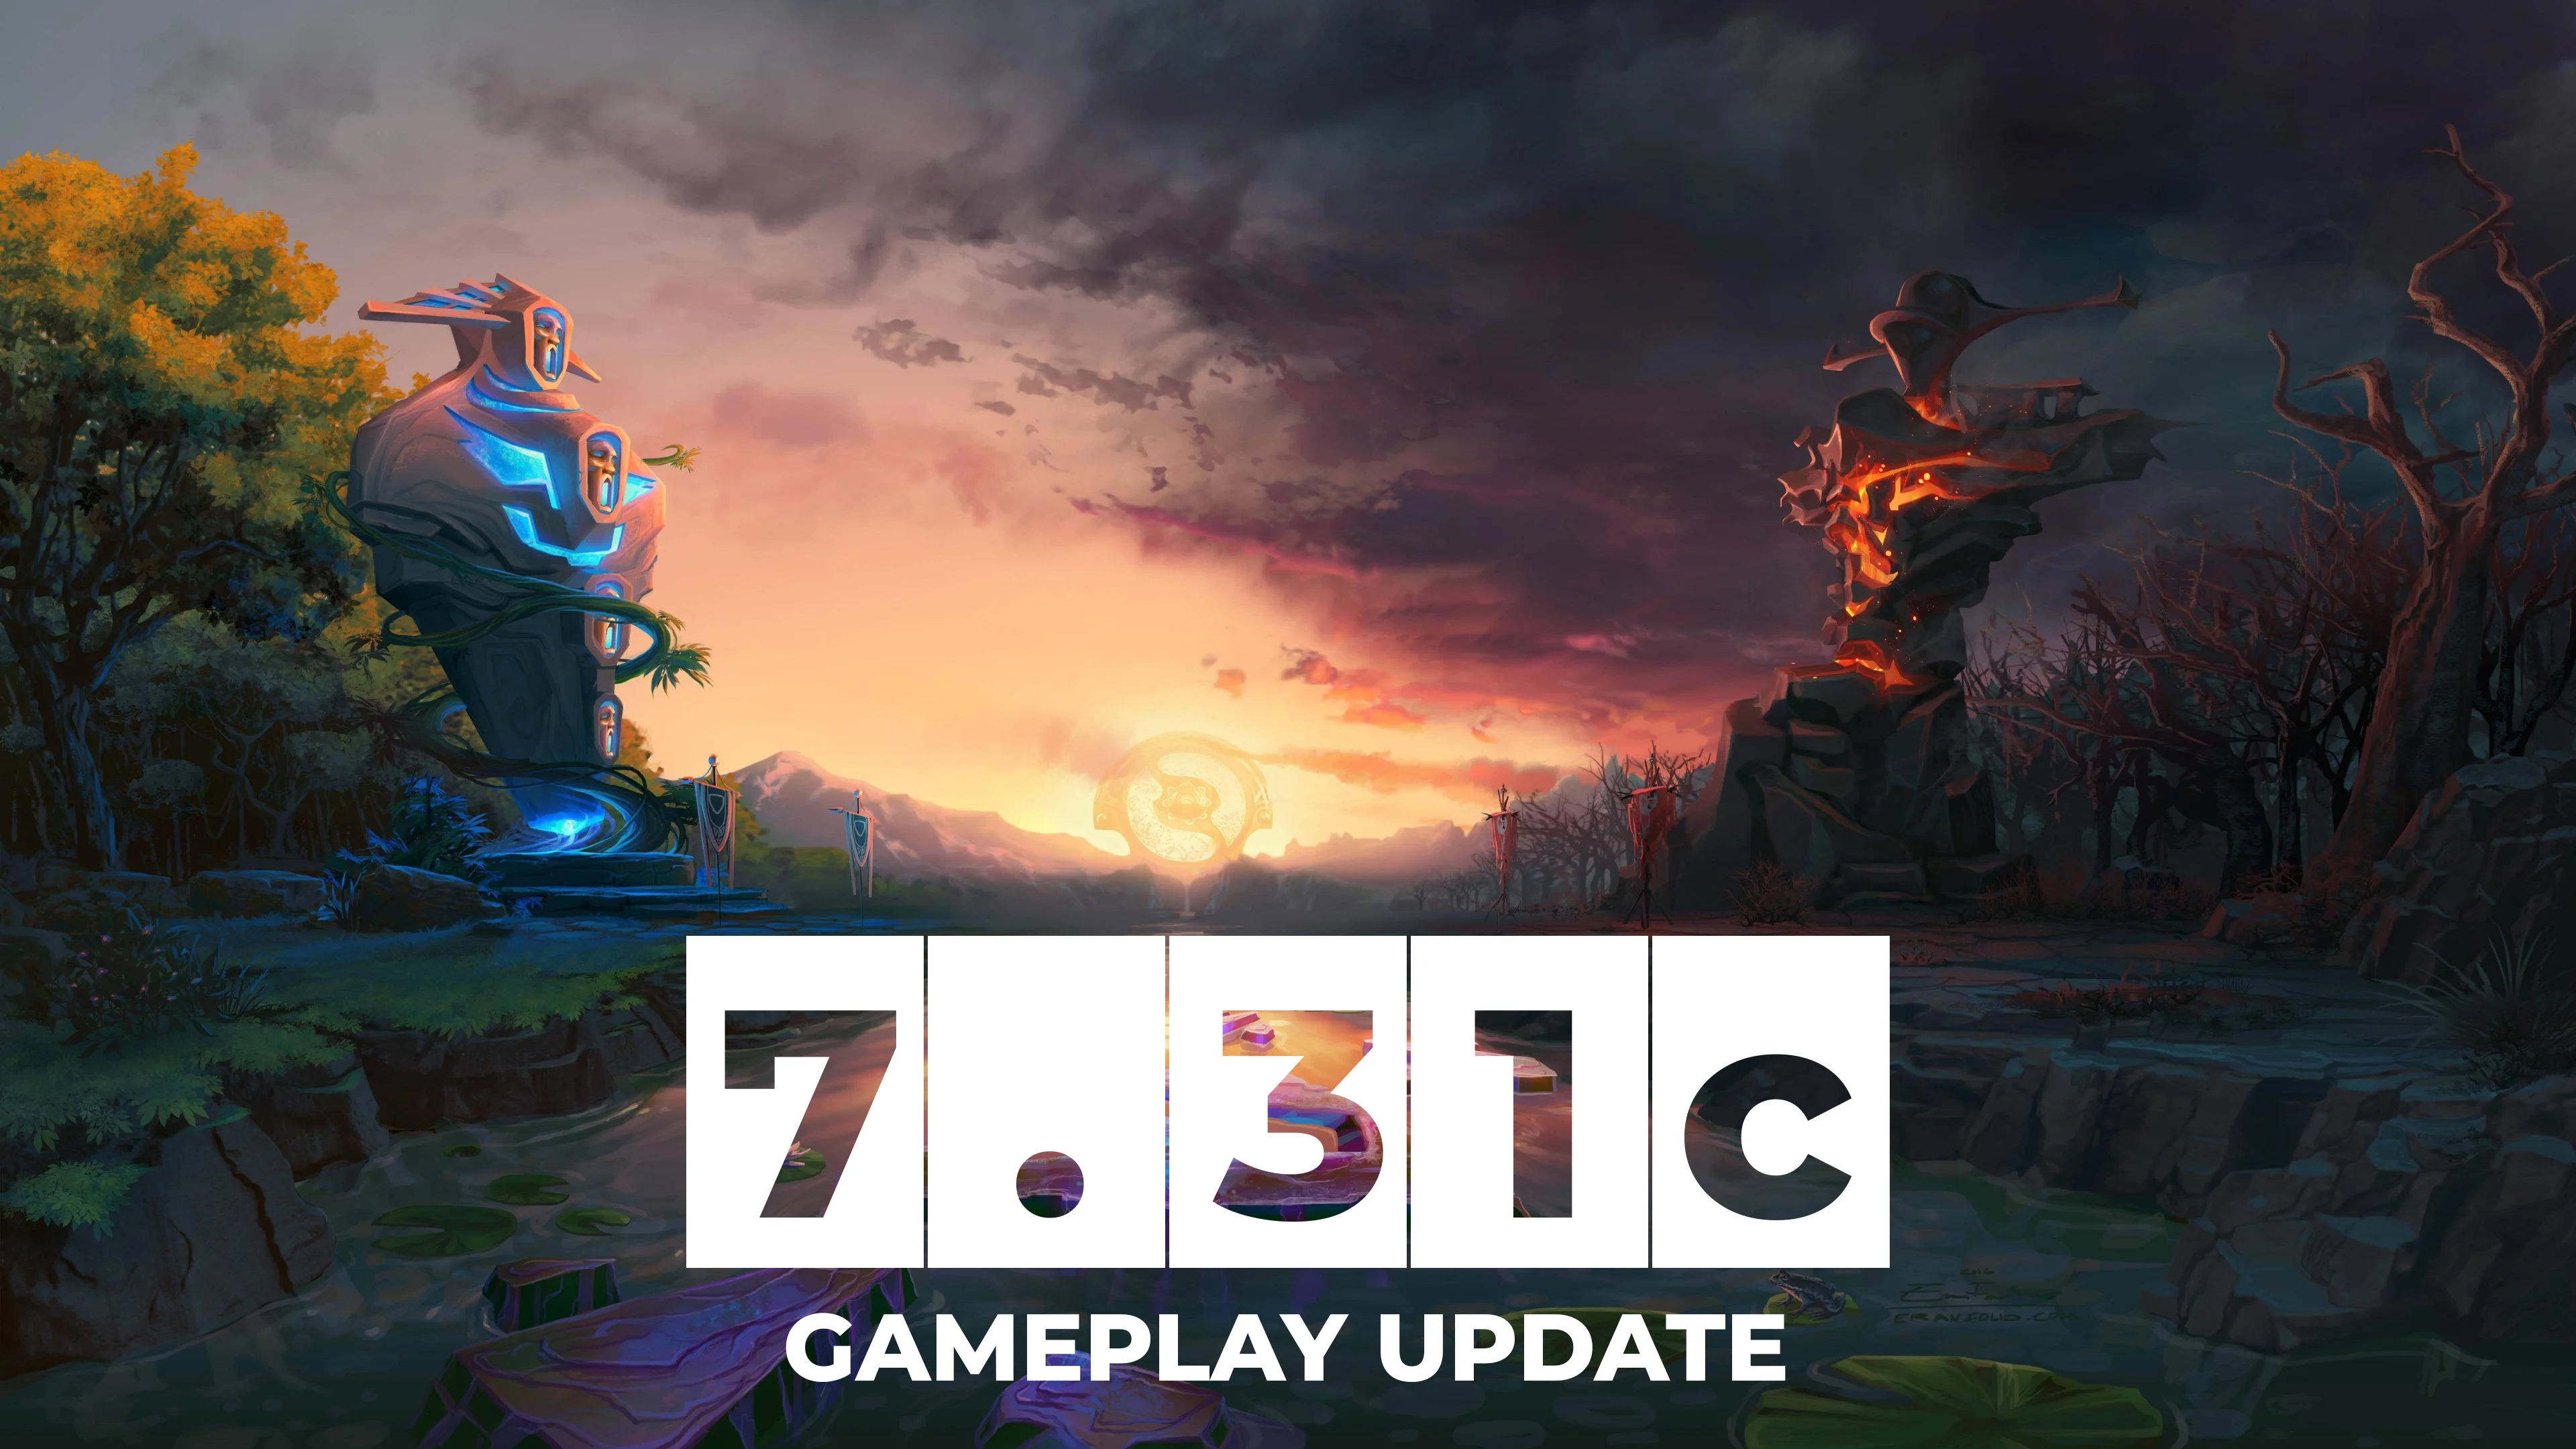 The much longed-for 7.31c Dota 2 patch is finally here